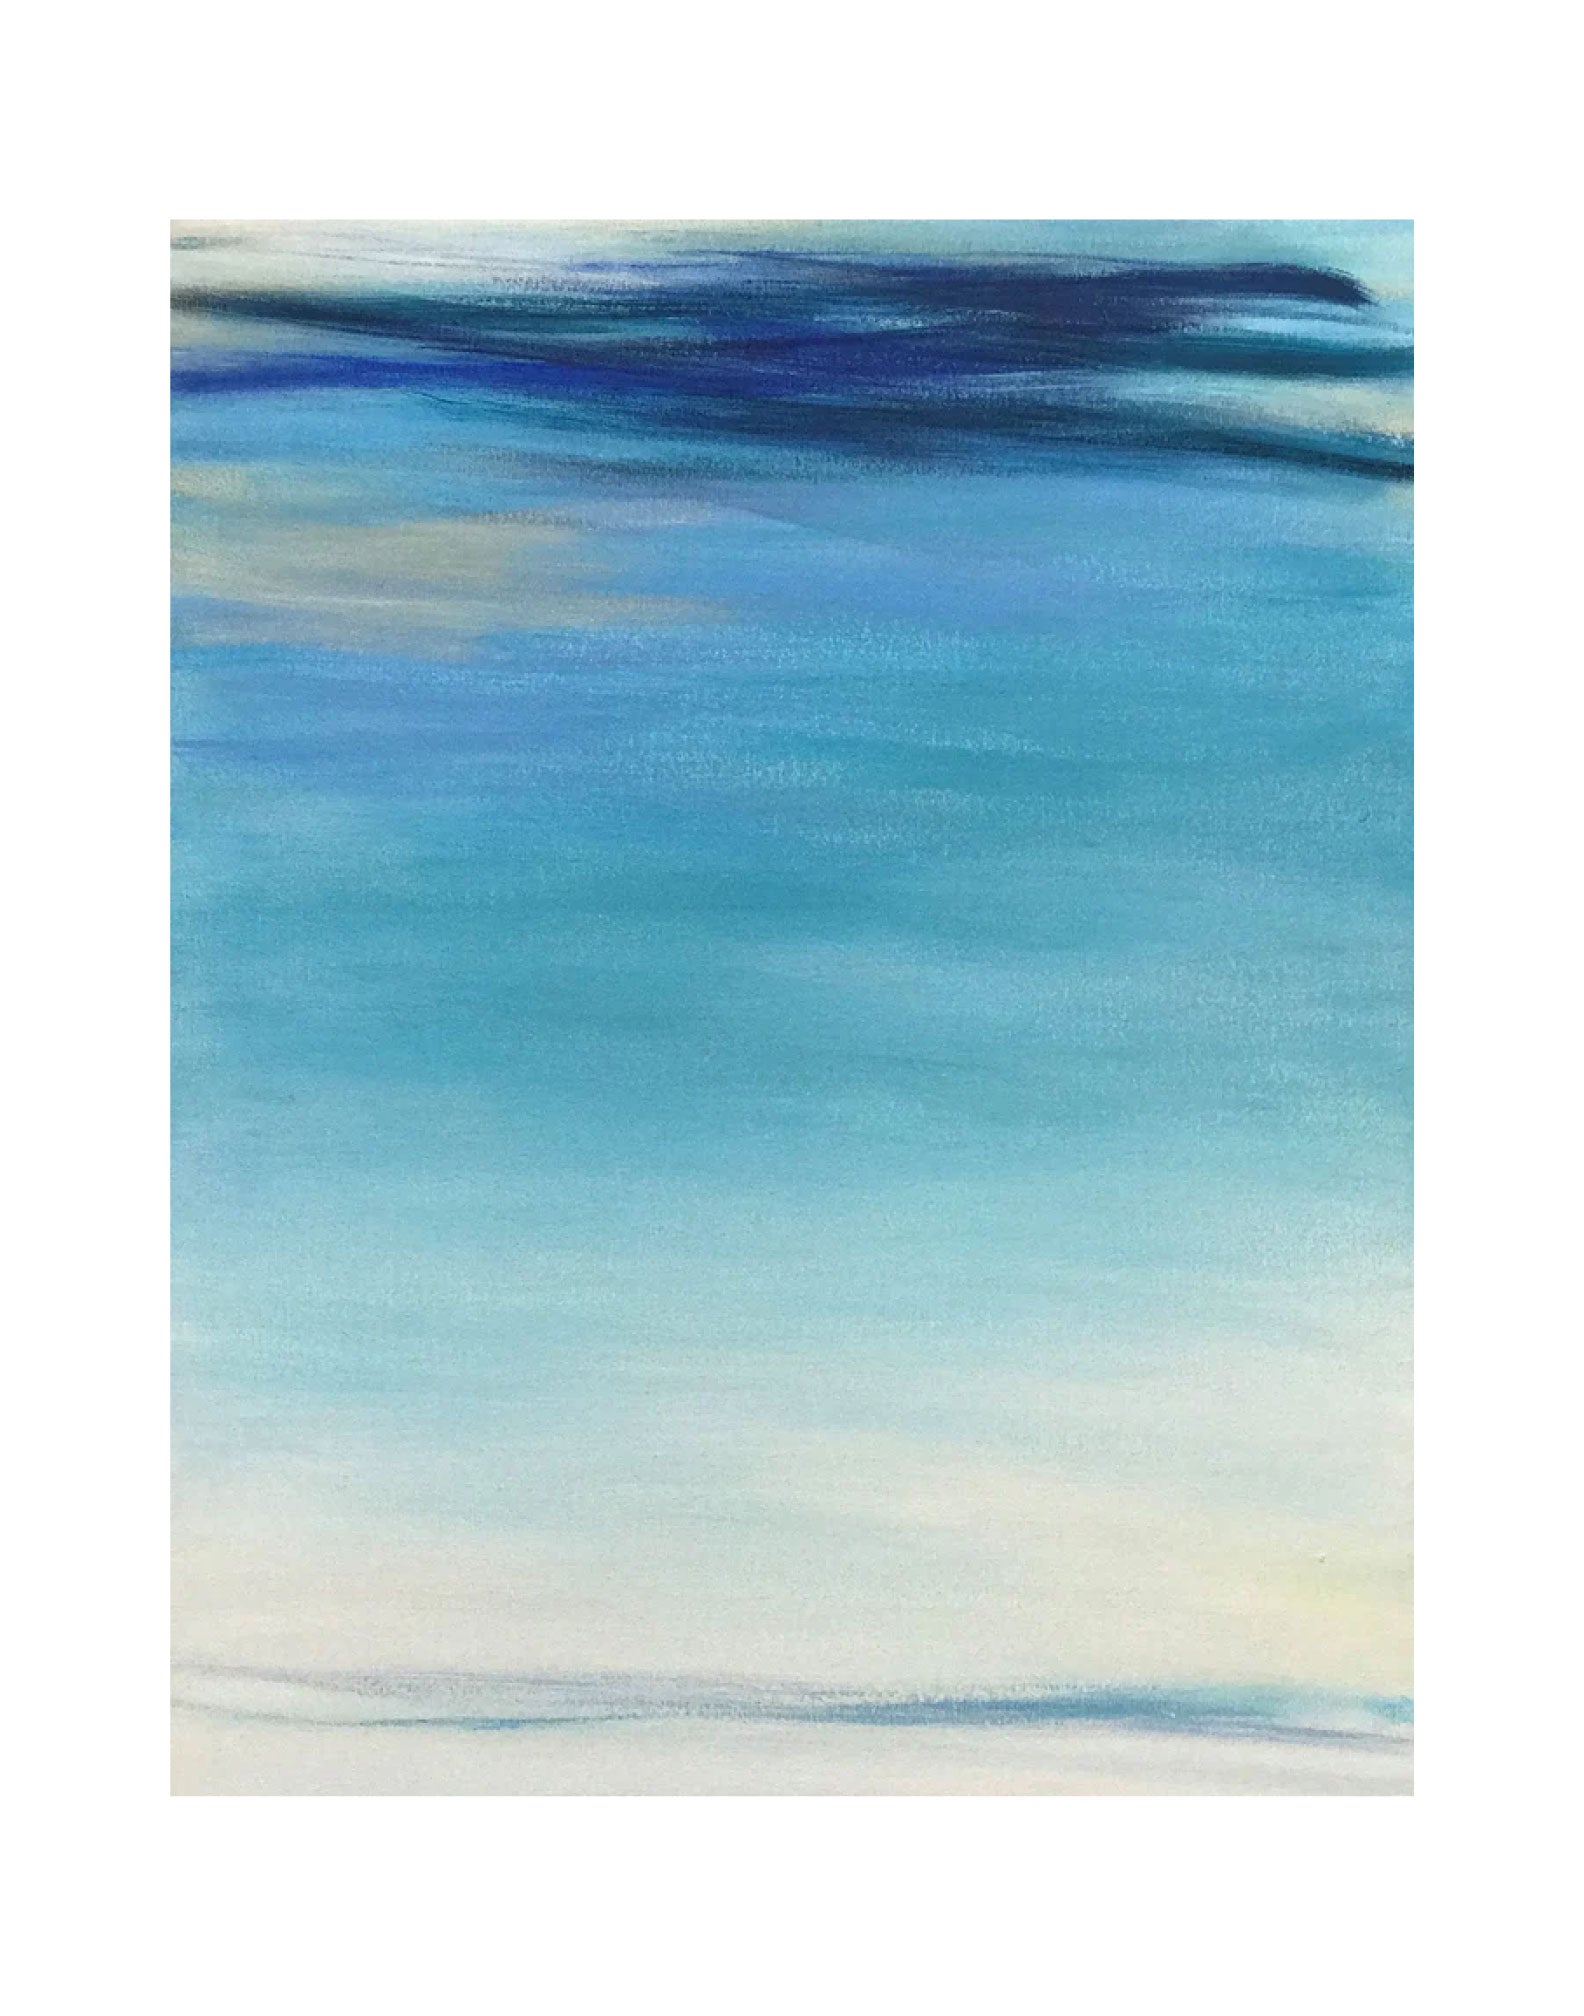 'WAVES #55' oil on canvas